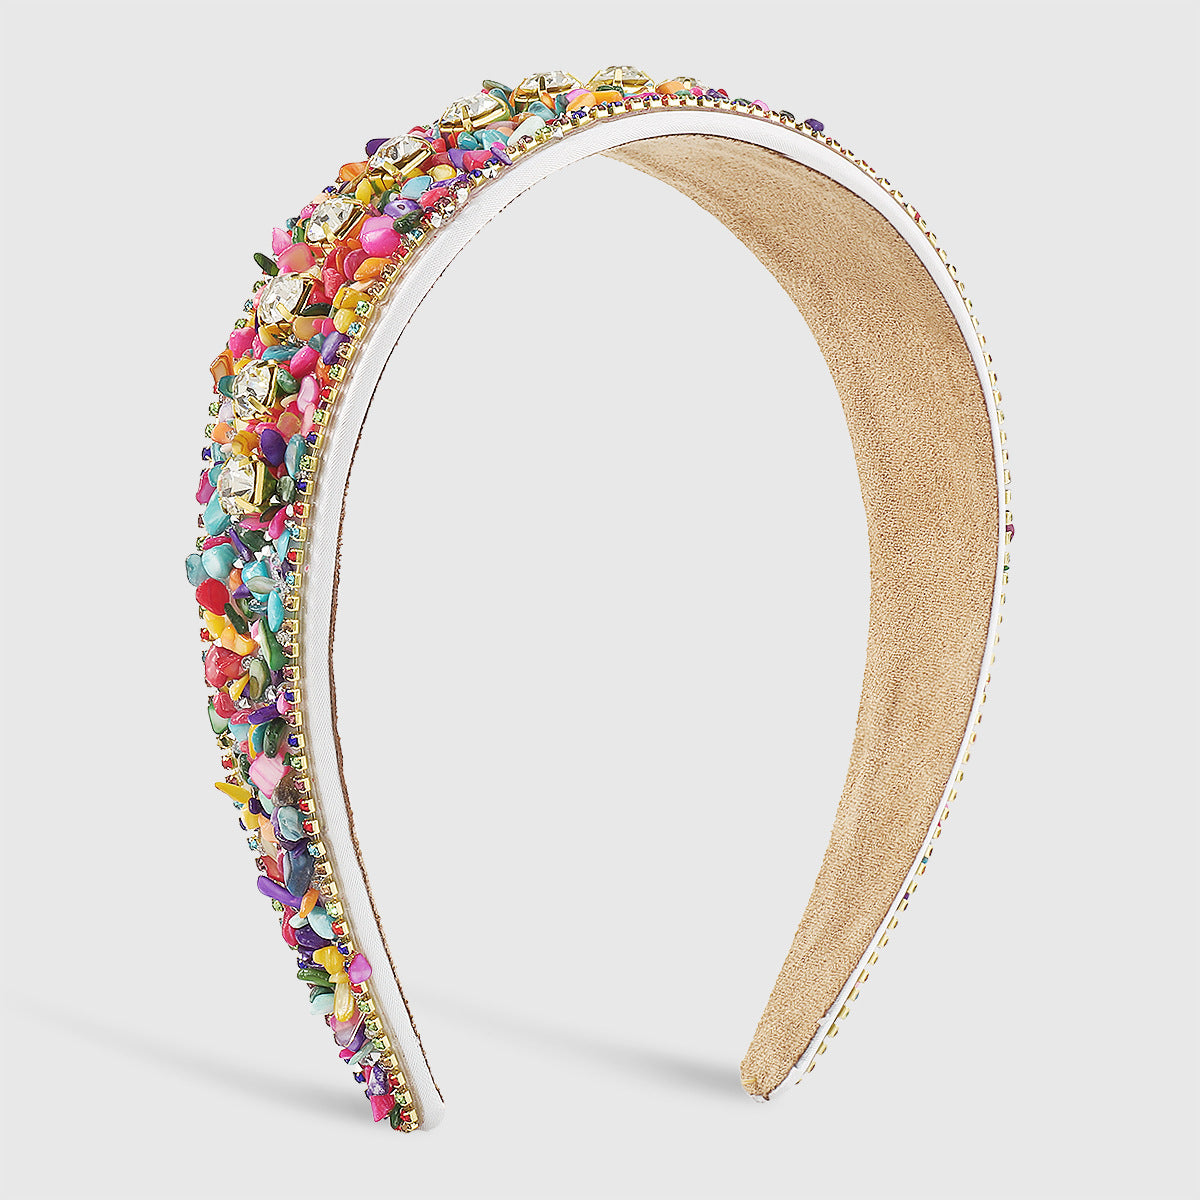 DANIELLE Retro Crushed Stone Studded Candy Color Headband